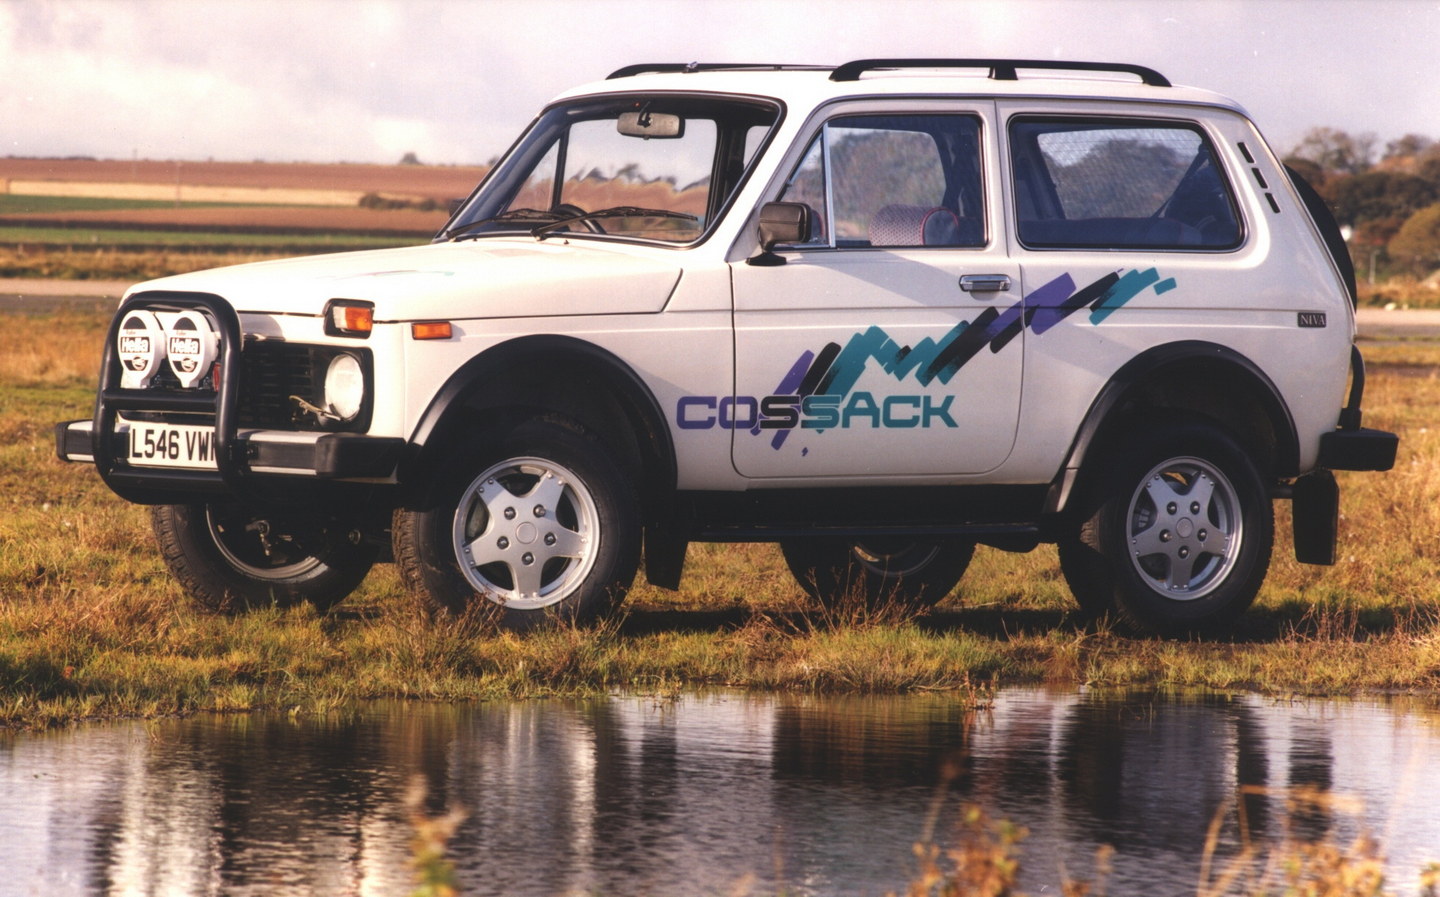 An earlier example of the Lada Niva